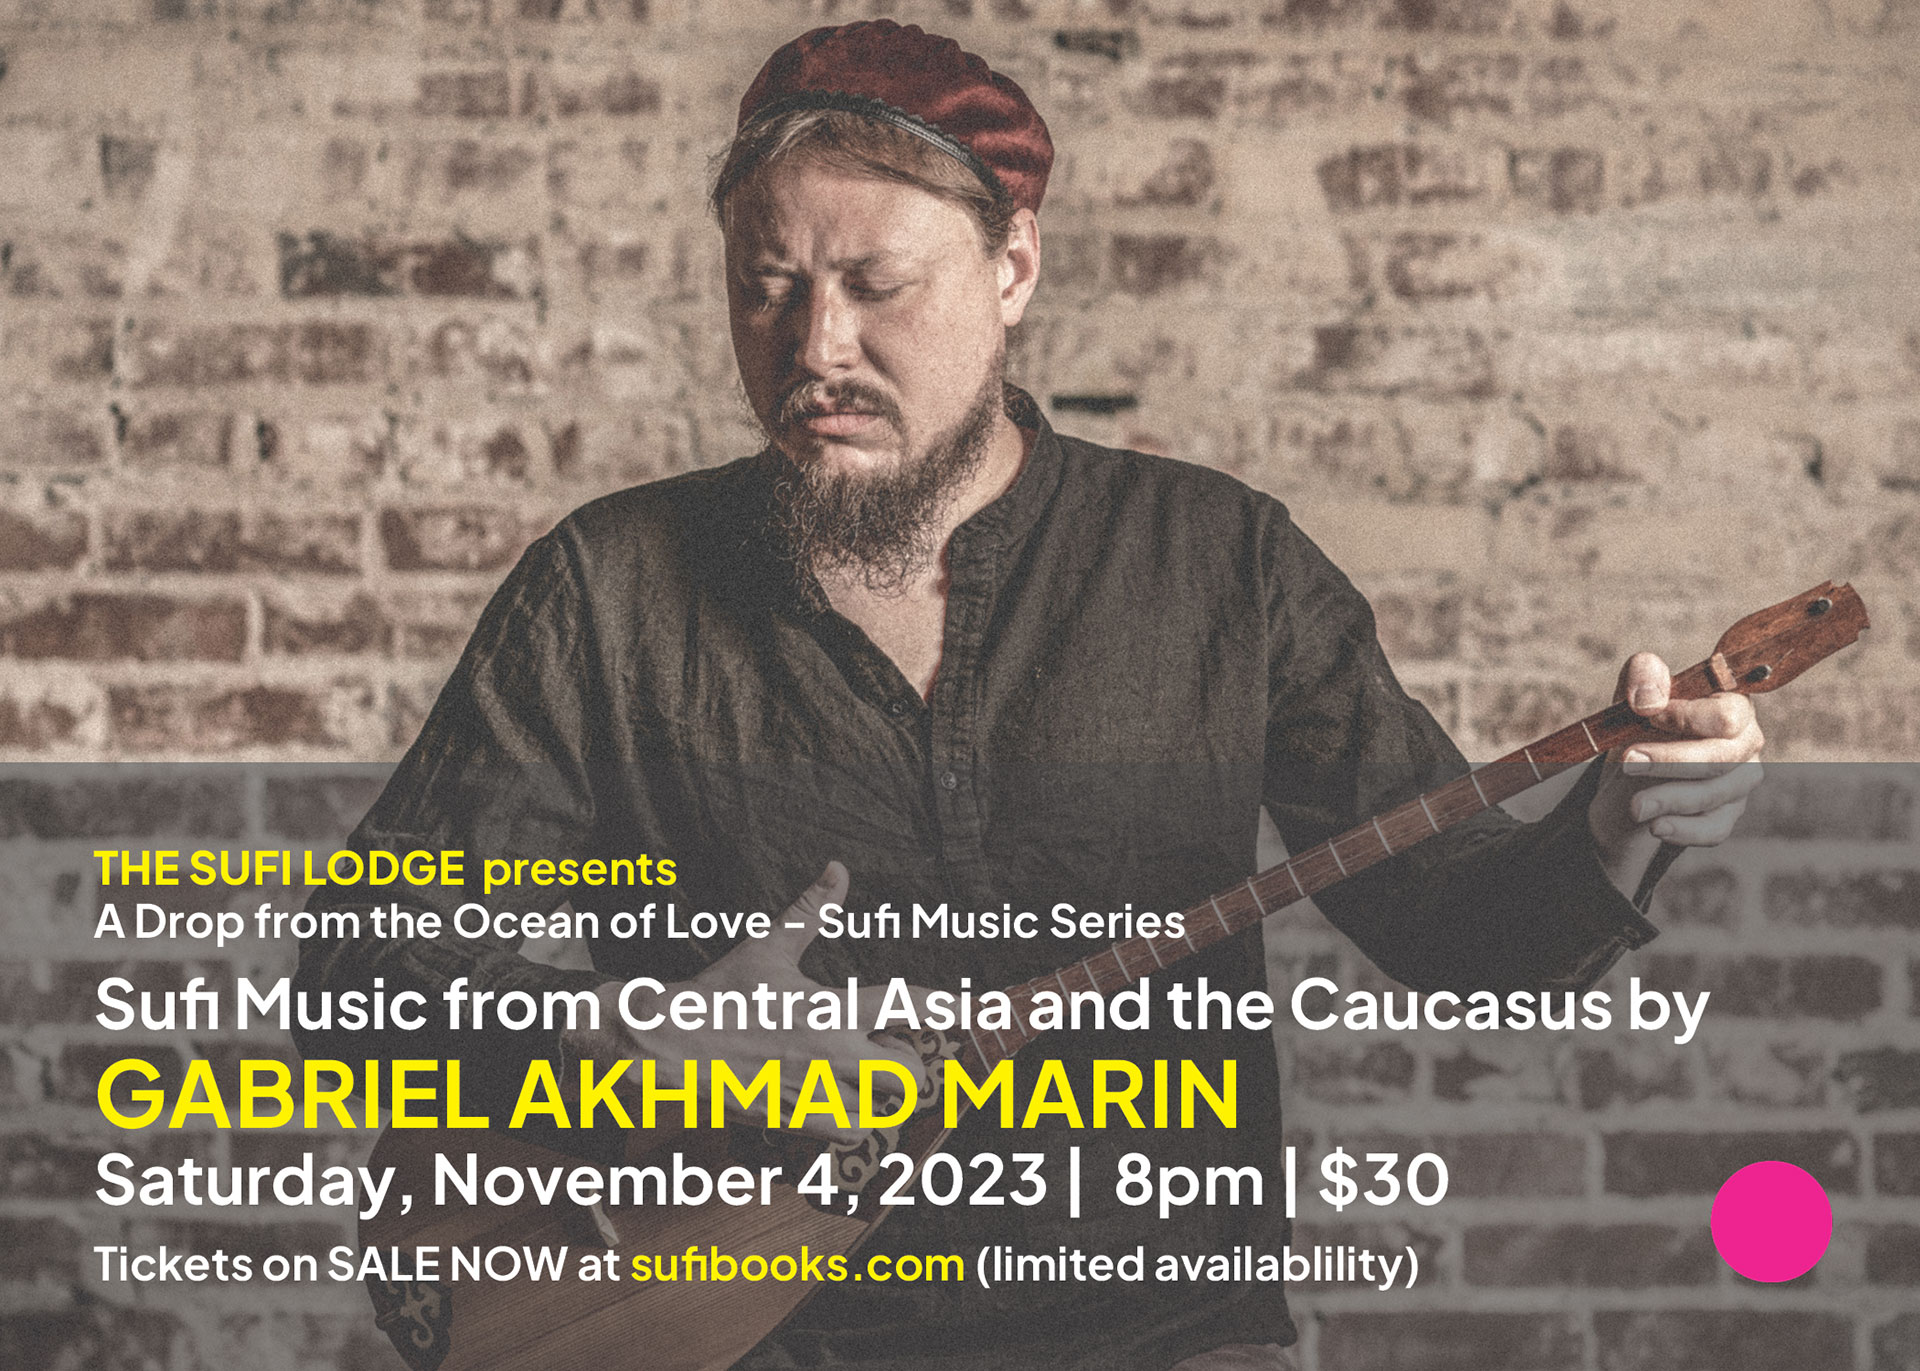 Saturday, November 4, 2023 | Sufi Music from Central Asia and the Caucasus by Gabriel Akhmad Marin  |  8pm | $30